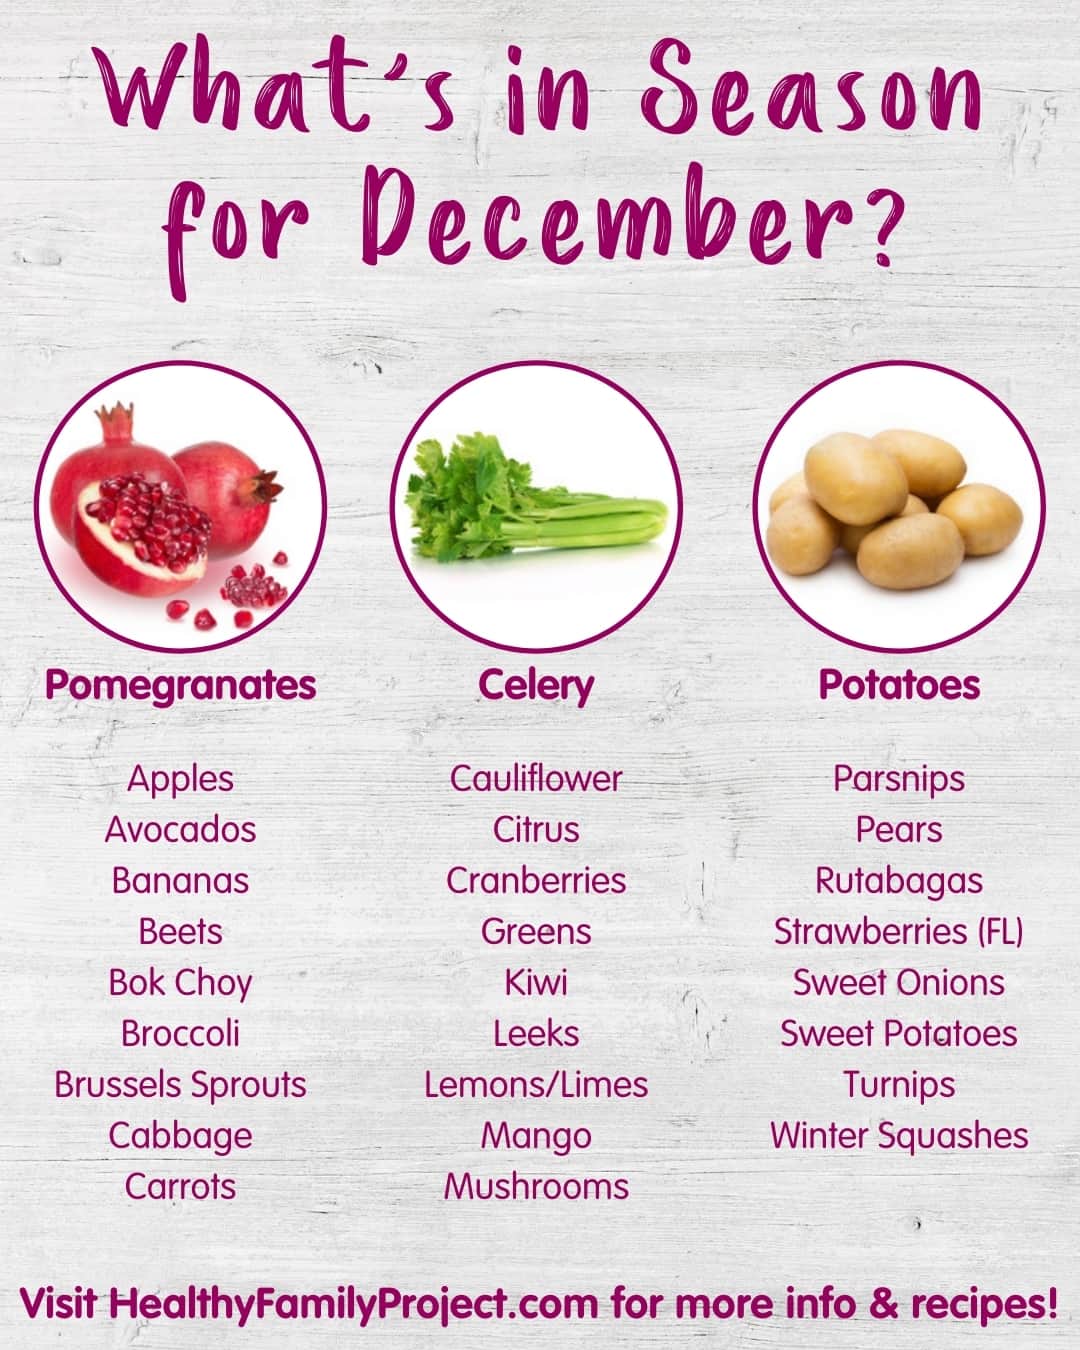 What’s in Season for December